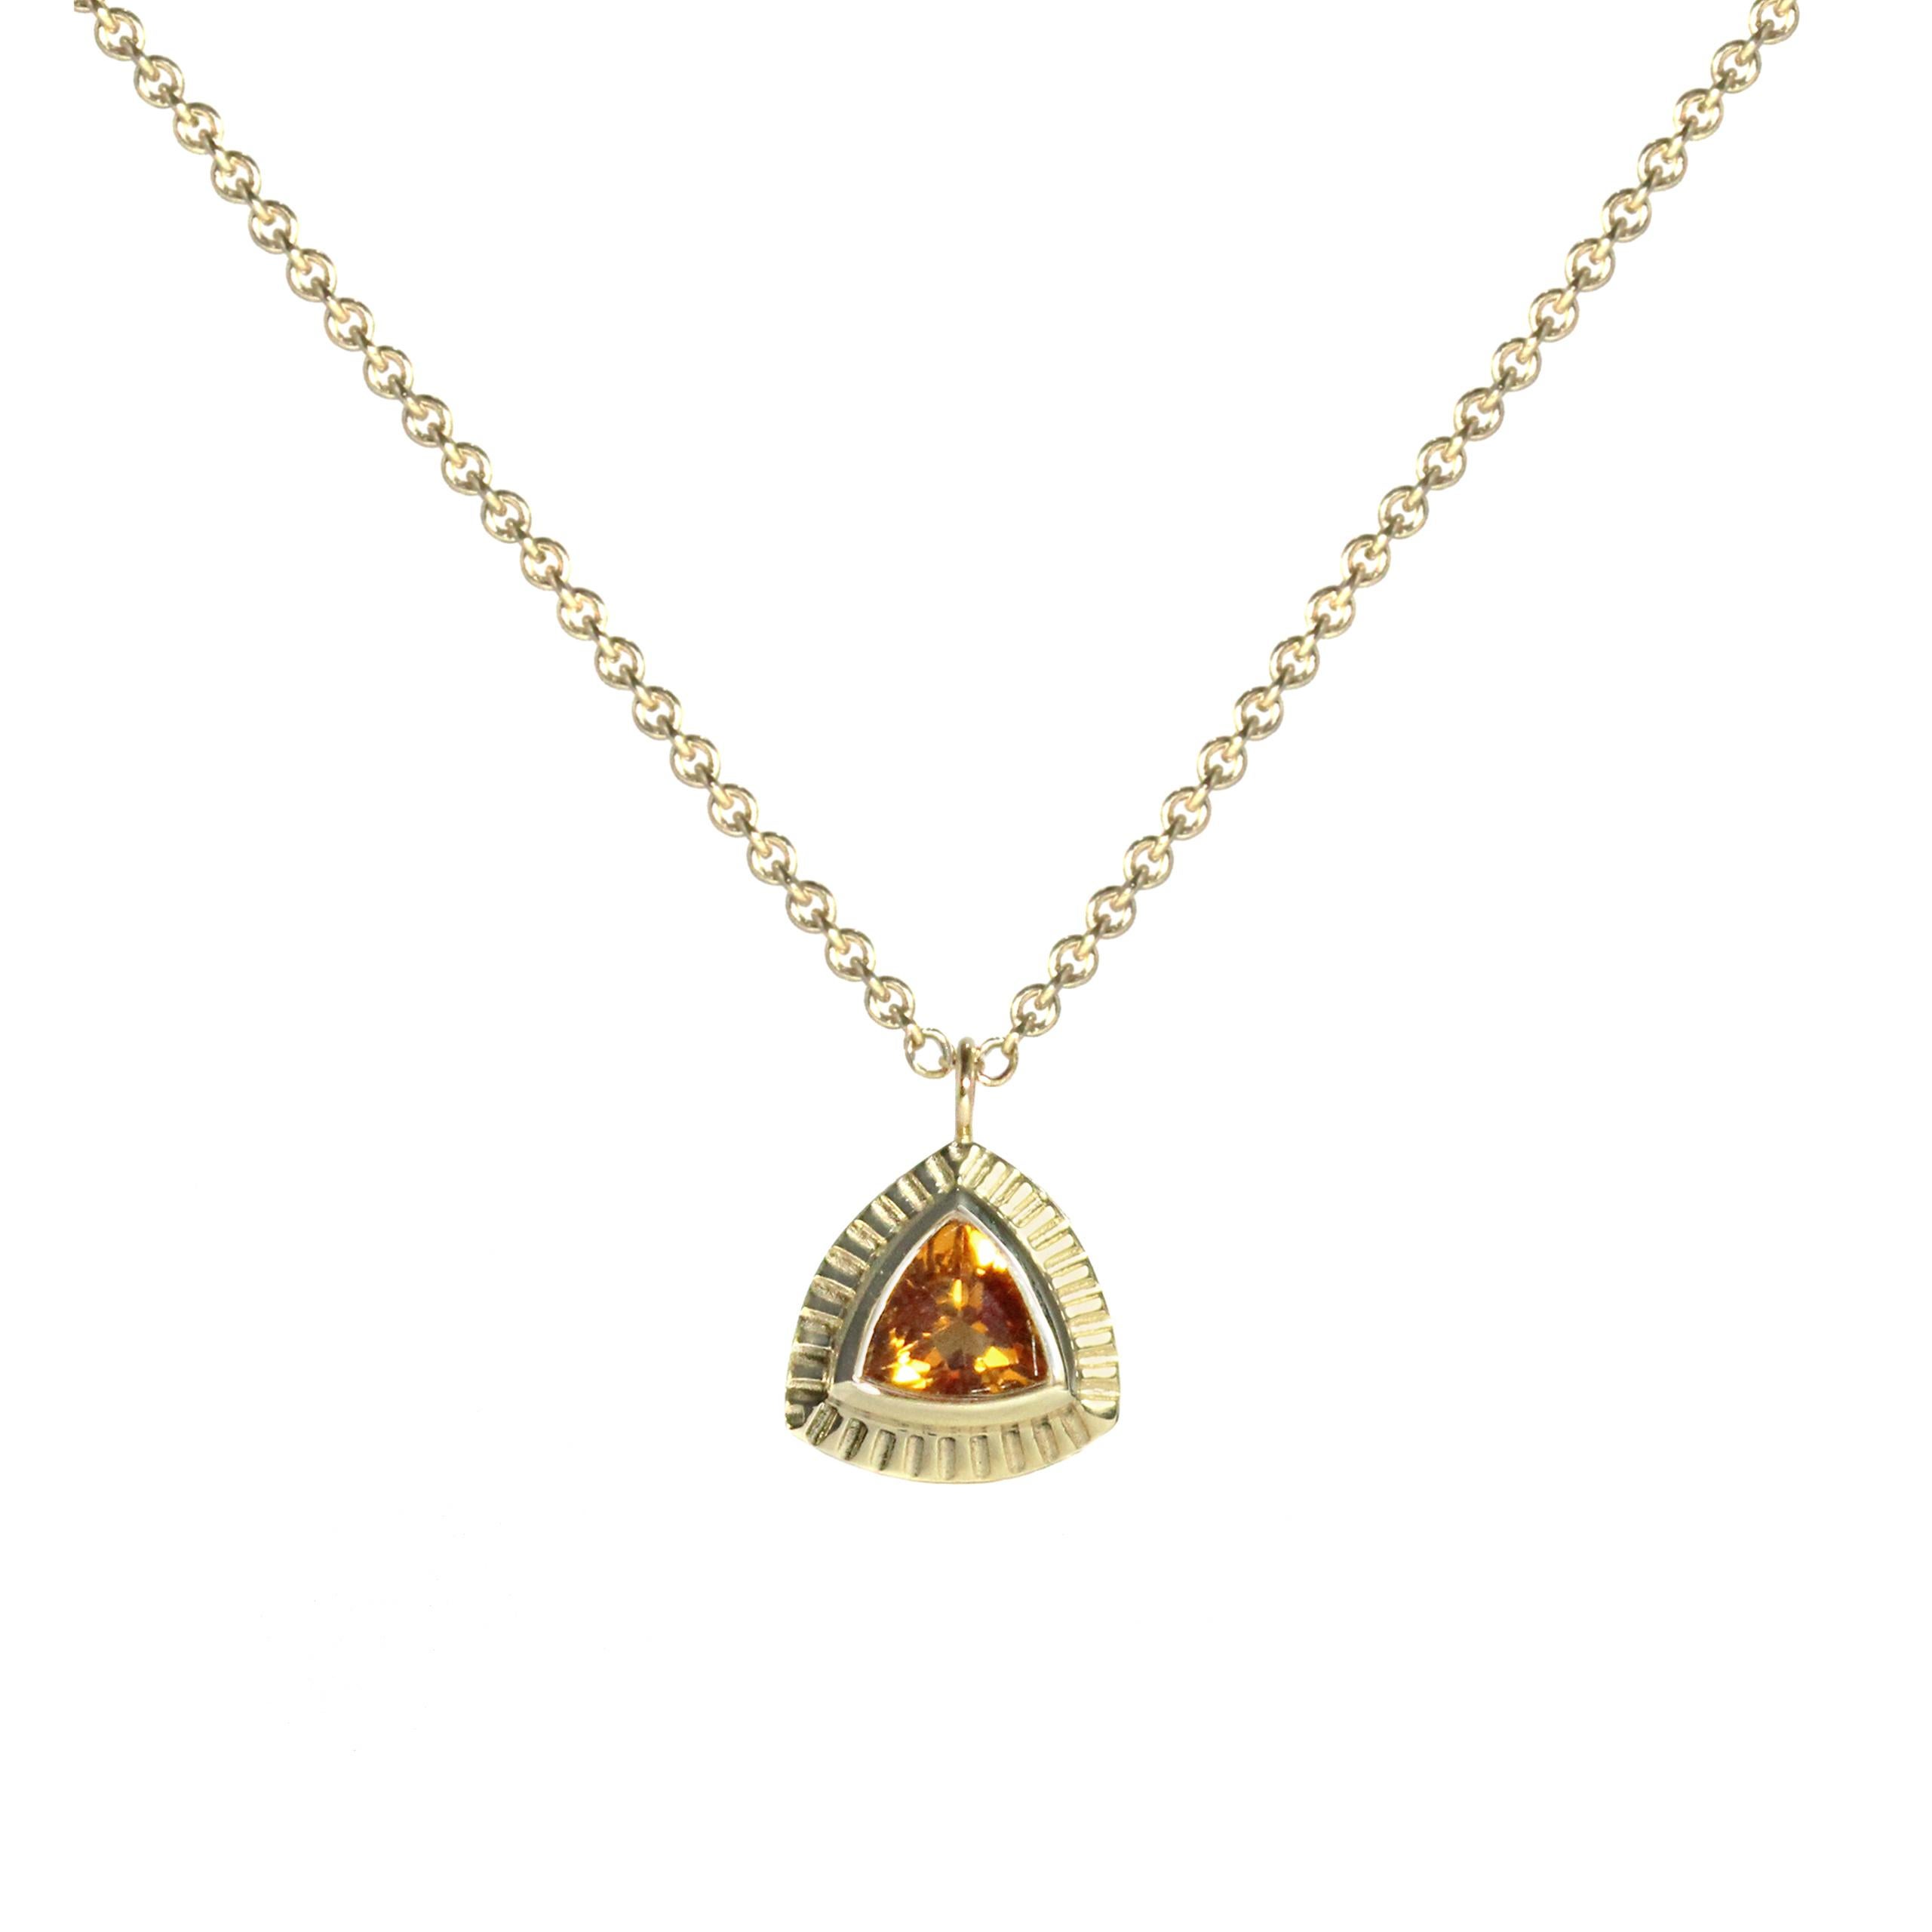 Trillion Cut Emily Kuvin Gold and Green Tourmaline Trillion Necklace